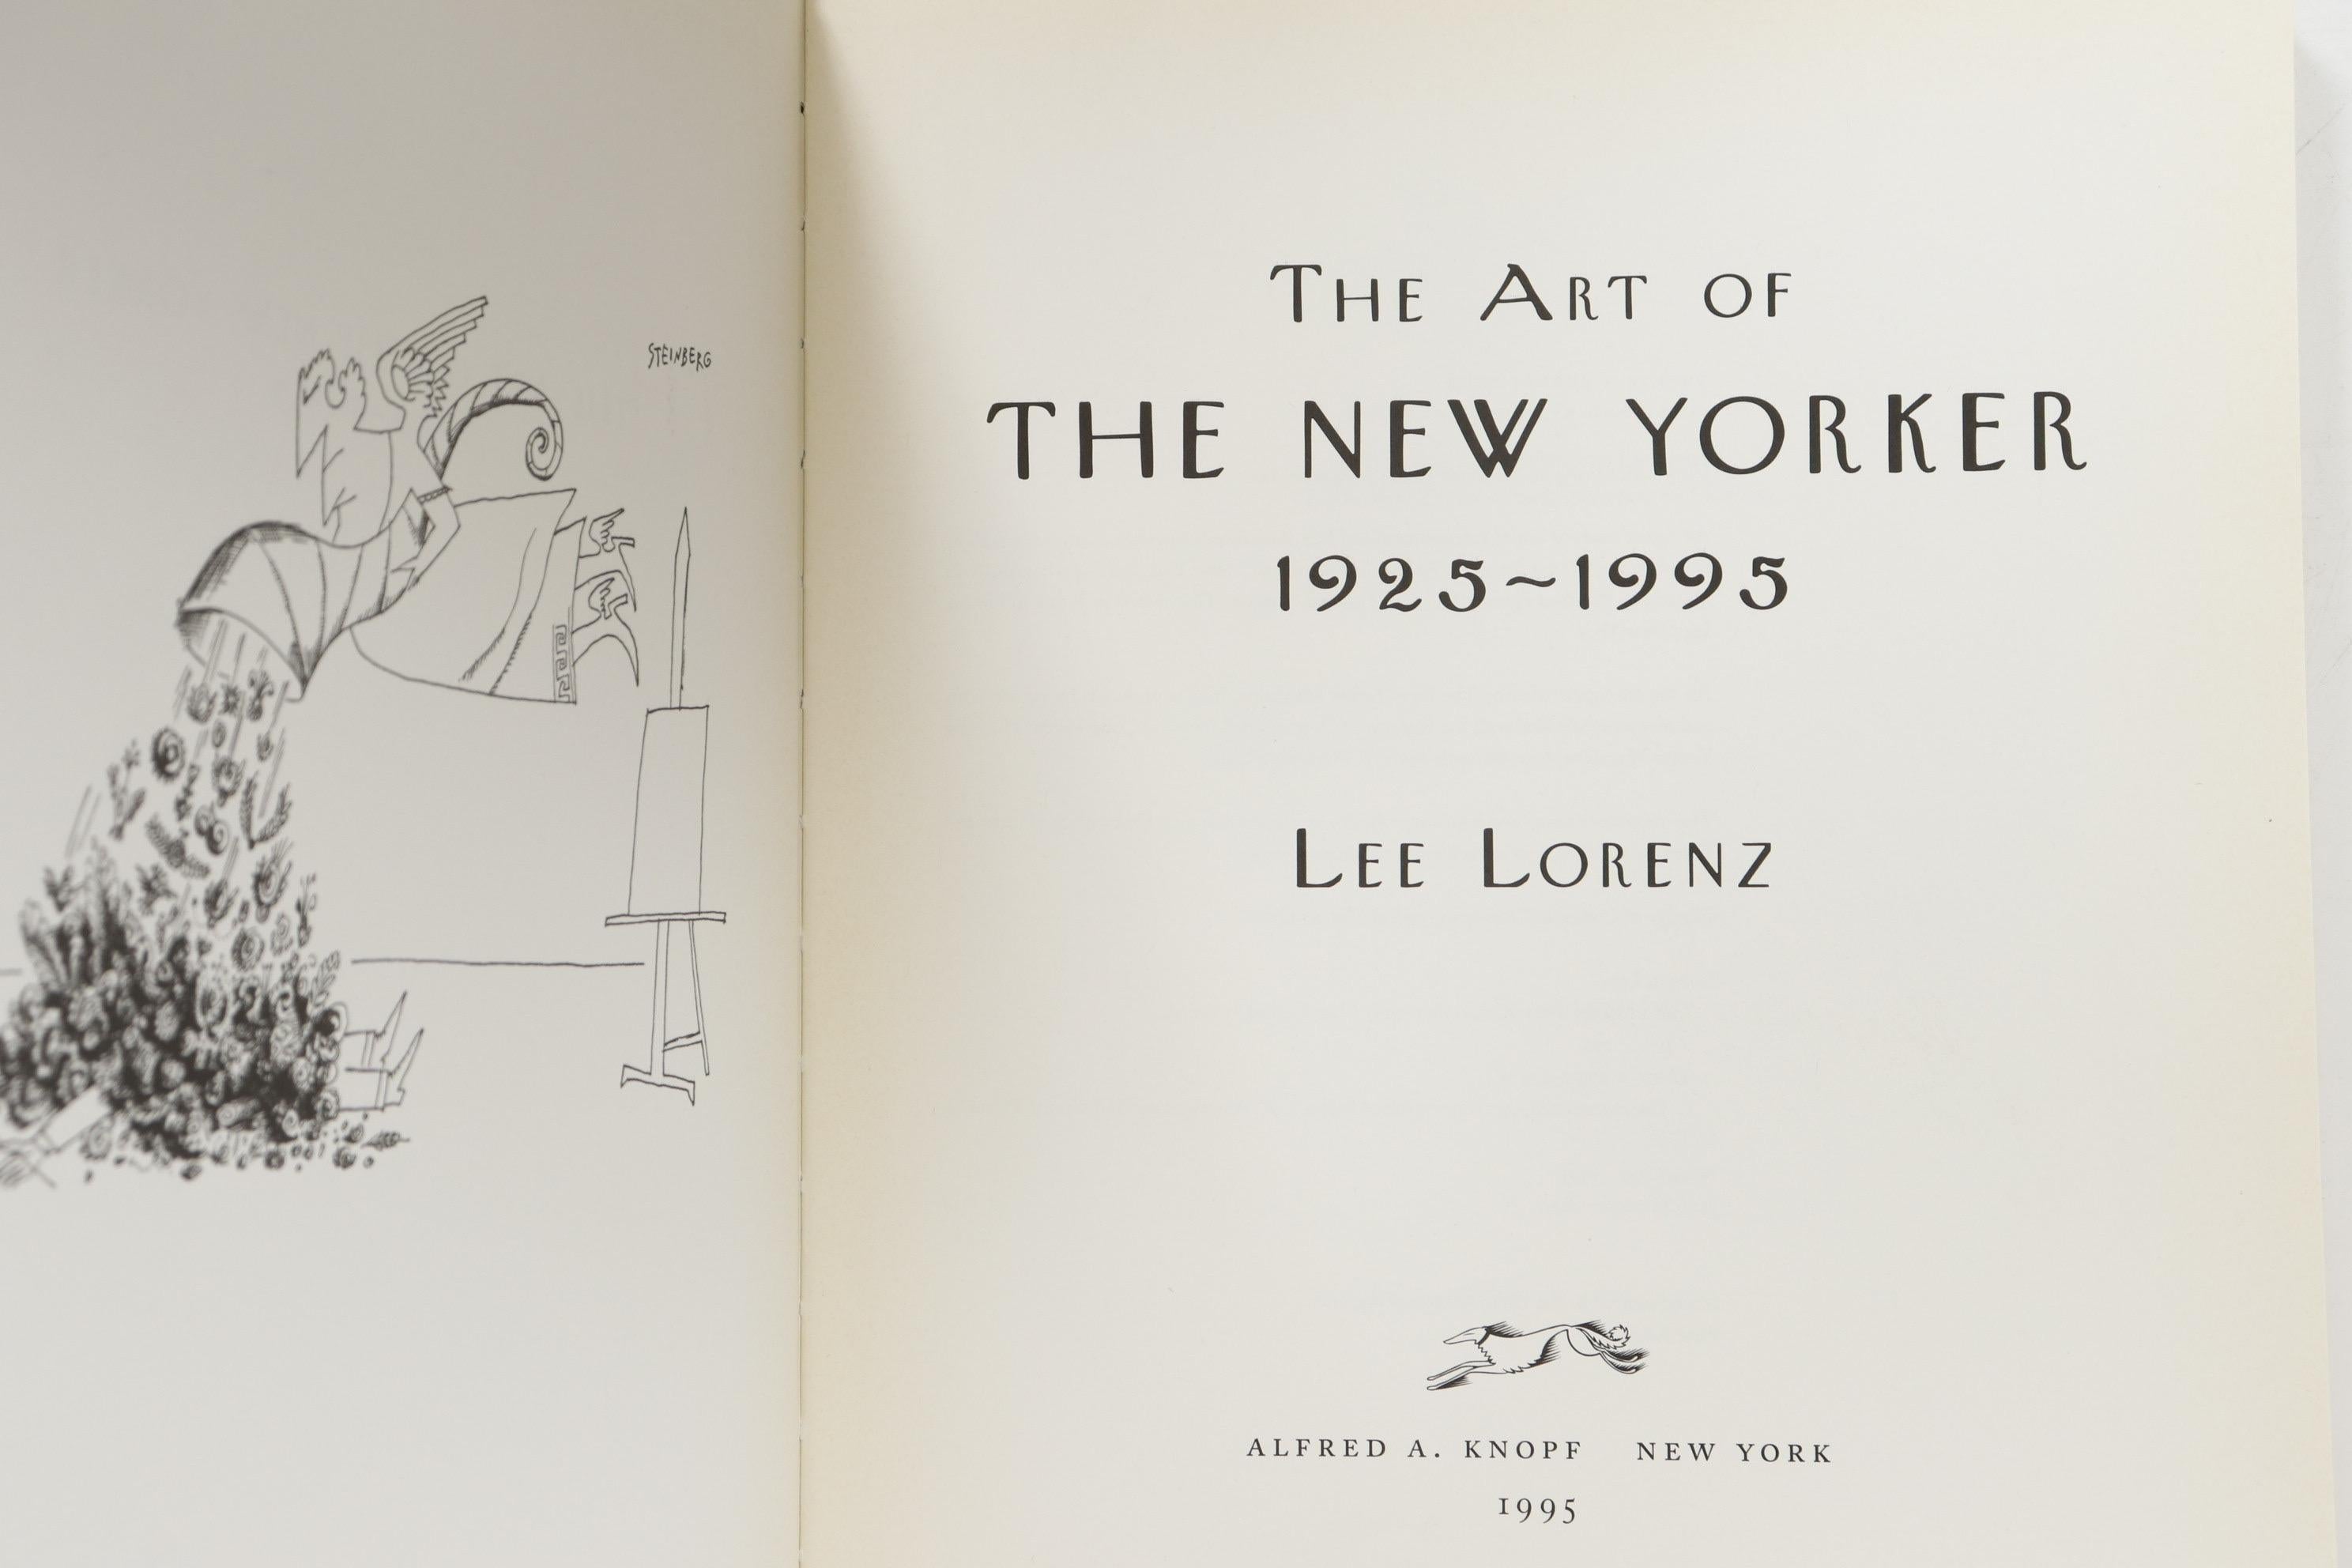 The Art of the New Yorker 1925-1995 by Lee Lorenz. First edition, published in 1995 by Alfred A. Knopf of New York. Manufactured in the United States of America. Hardcover with dust jacket, 200 pages with 400 illustrations and 32 pages in full color.